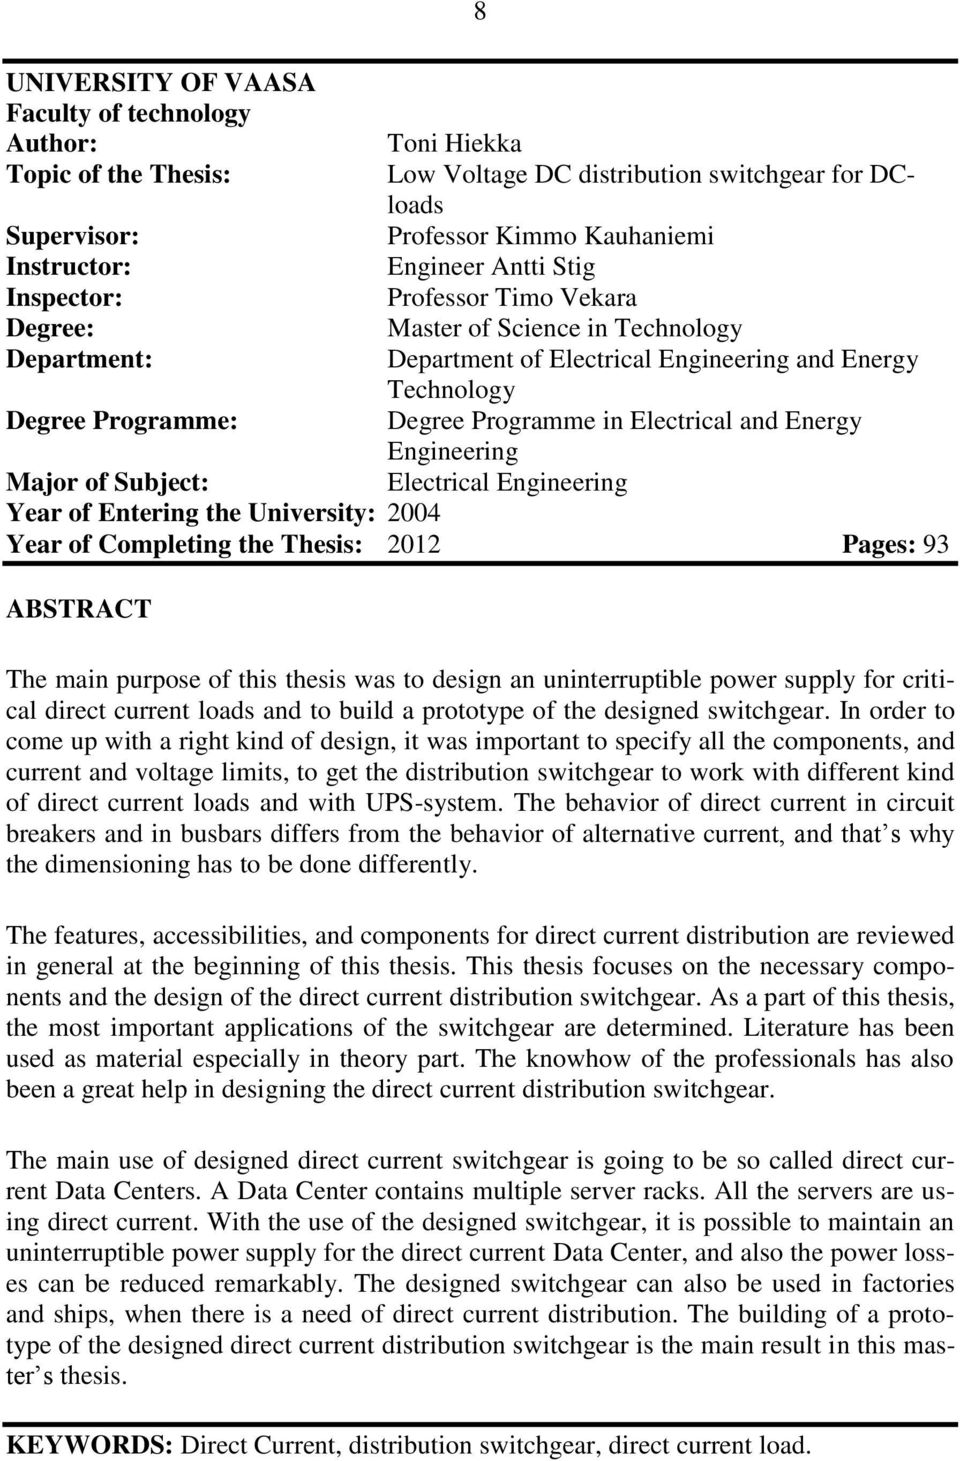 Electrical and Energy Engineering Major of Subject: Electrical Engineering Year of Entering the University: 2004 Year of Completing the Thesis: 2012 Pages: 93 ABSTRACT The main purpose of this thesis